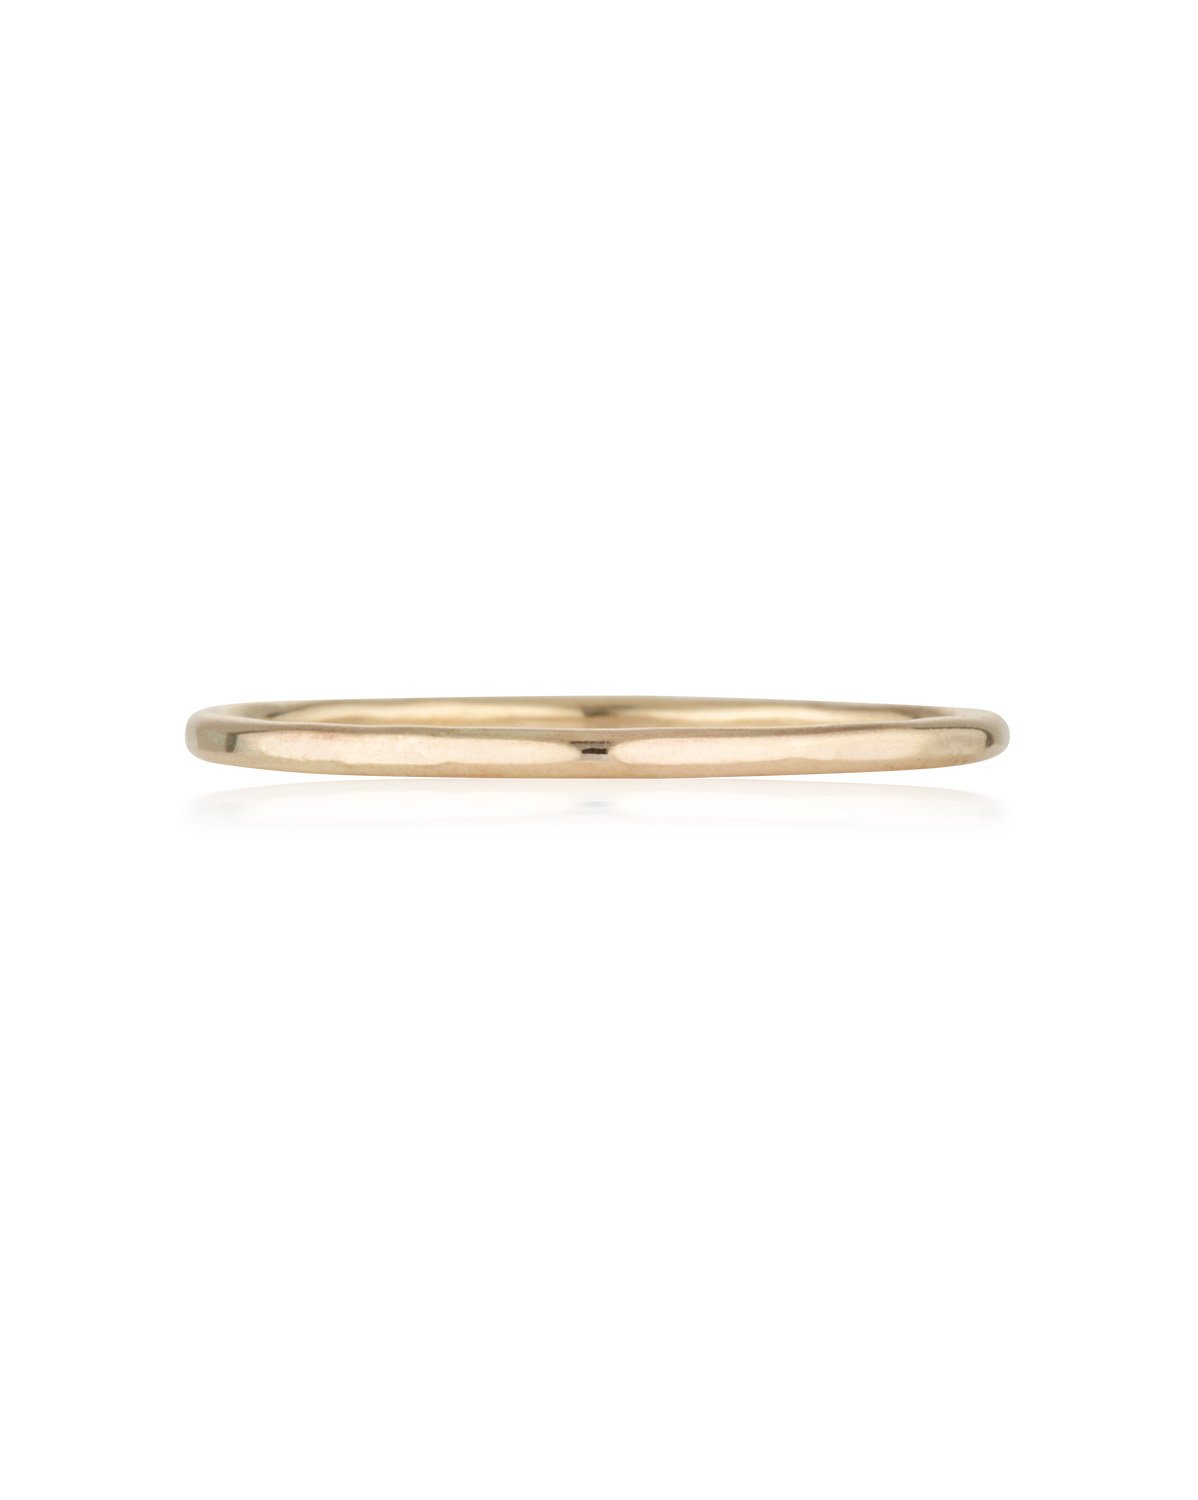 Journey Ring (9k Yellow Gold) by Sit & Wonder. A lightly hammered plain band.